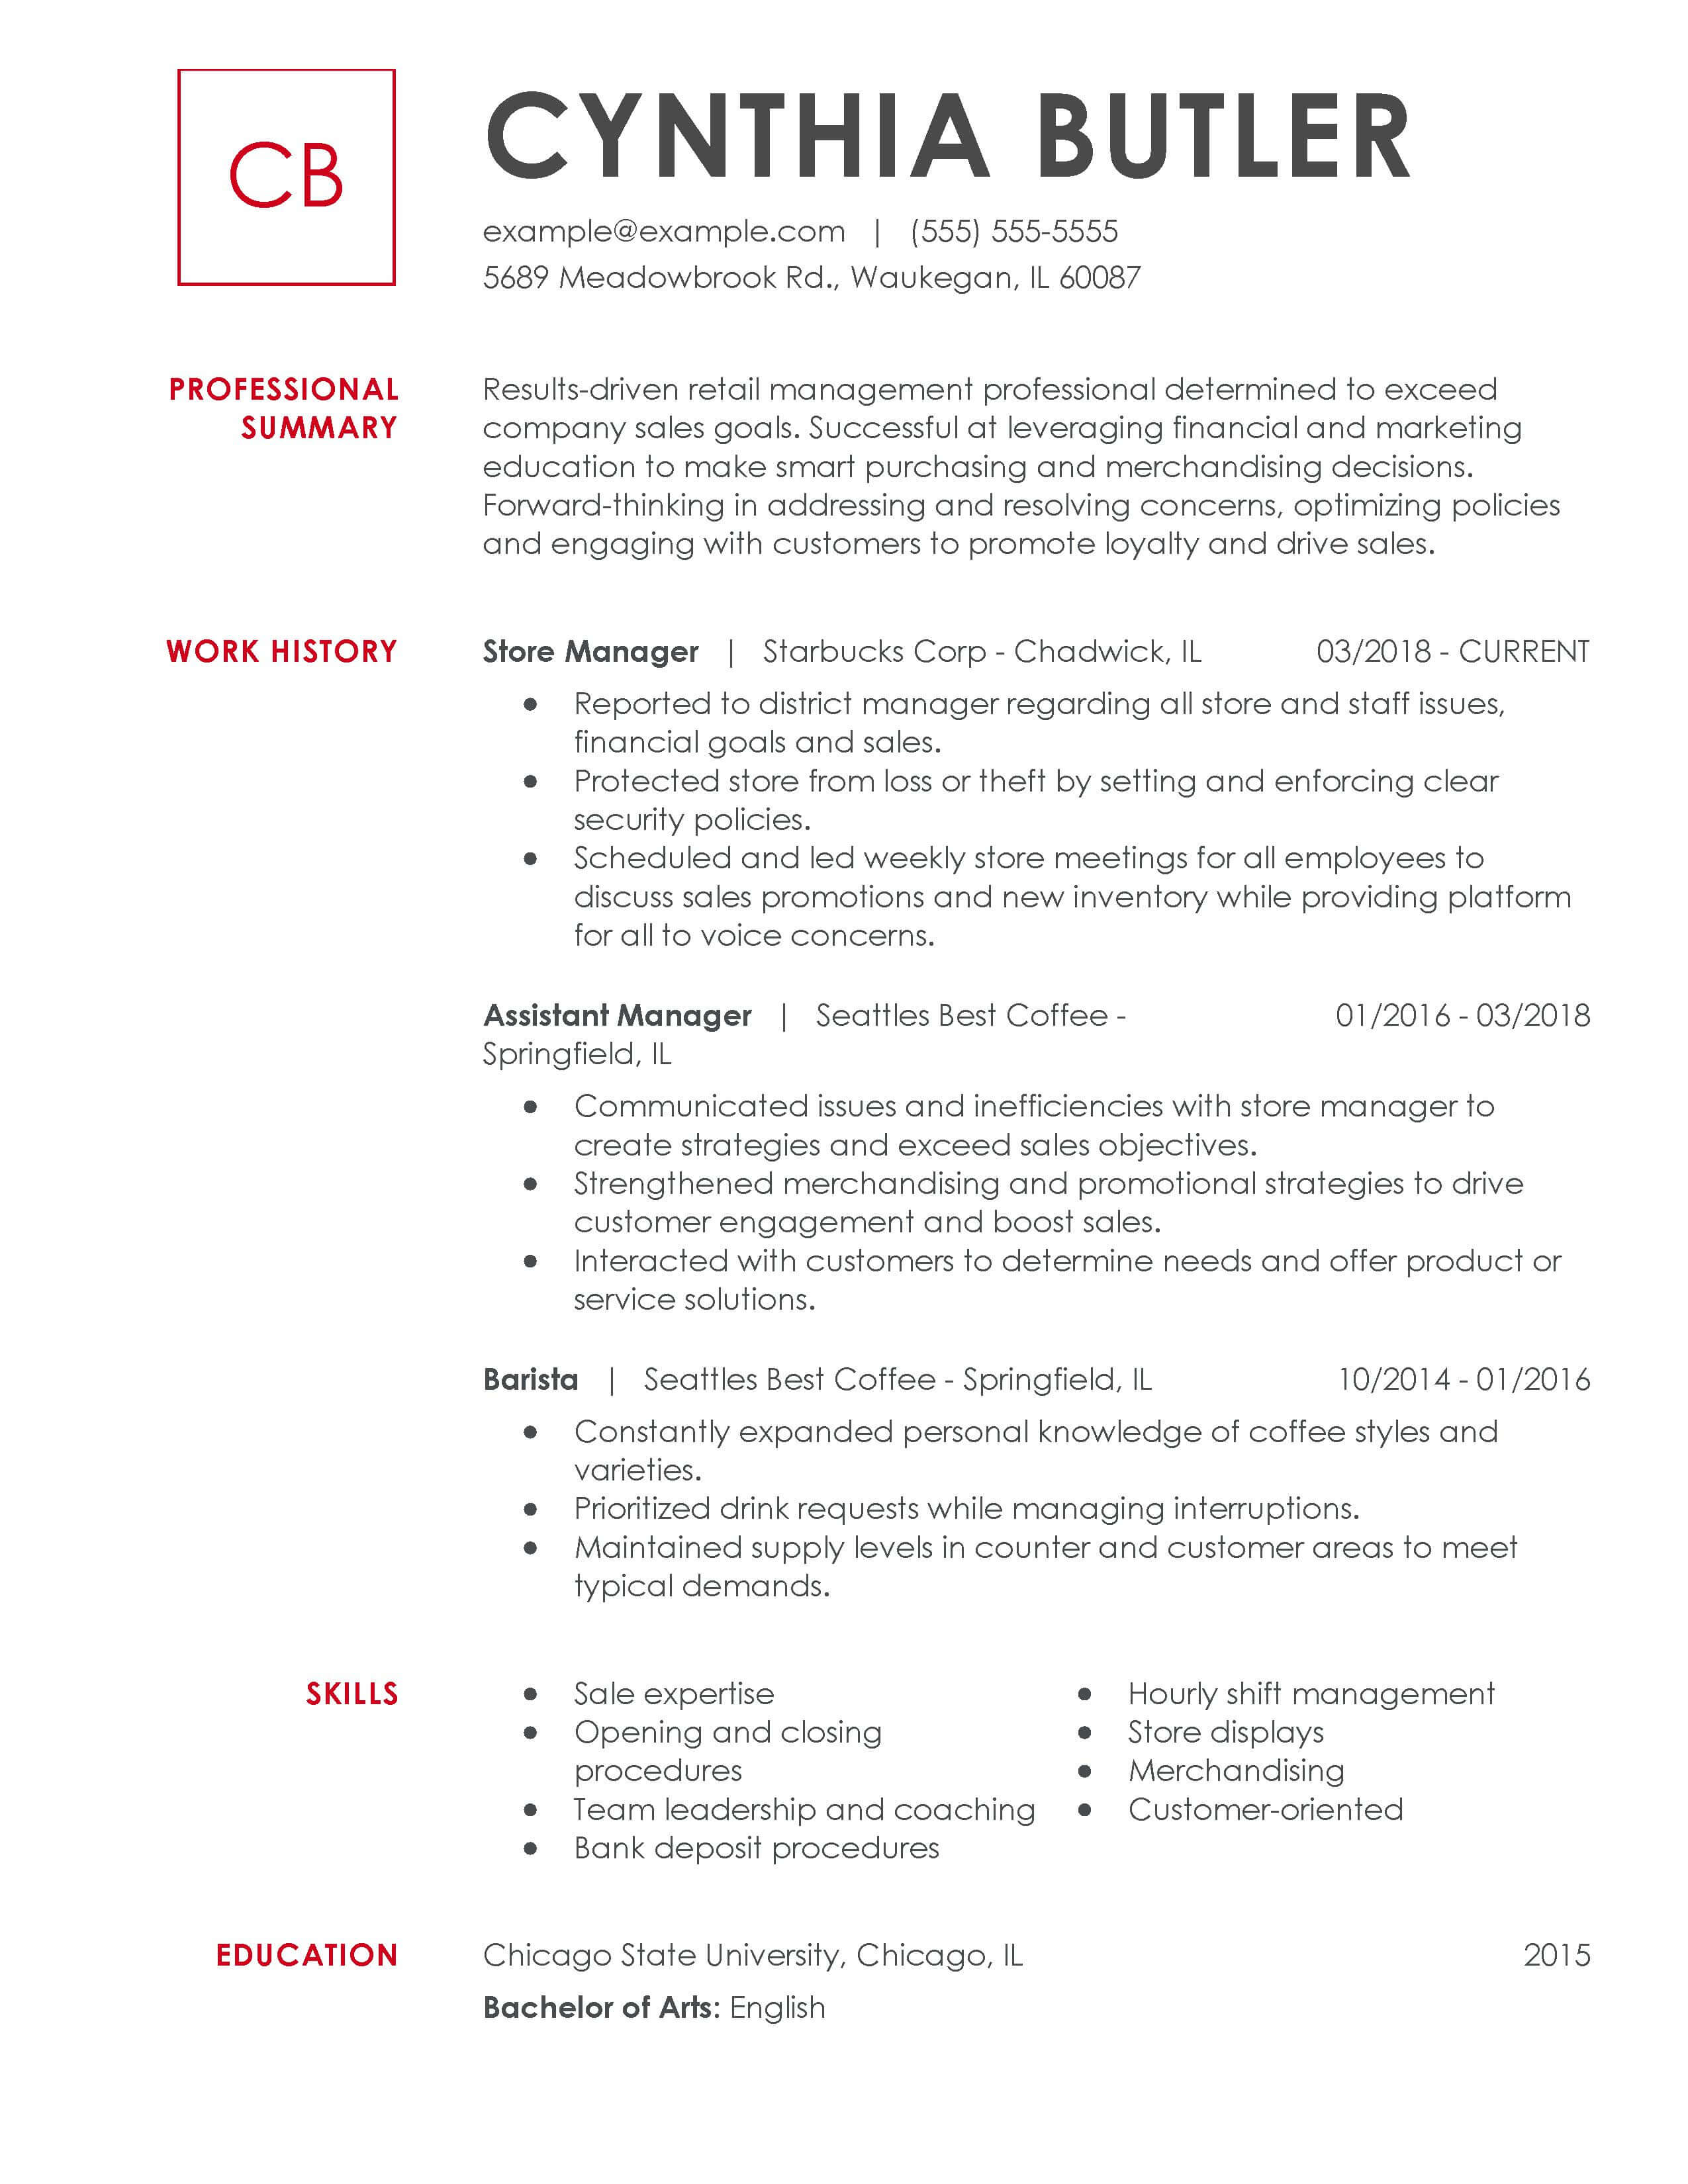 Example Of Resume 30 Resume Examples View Industry Job Title